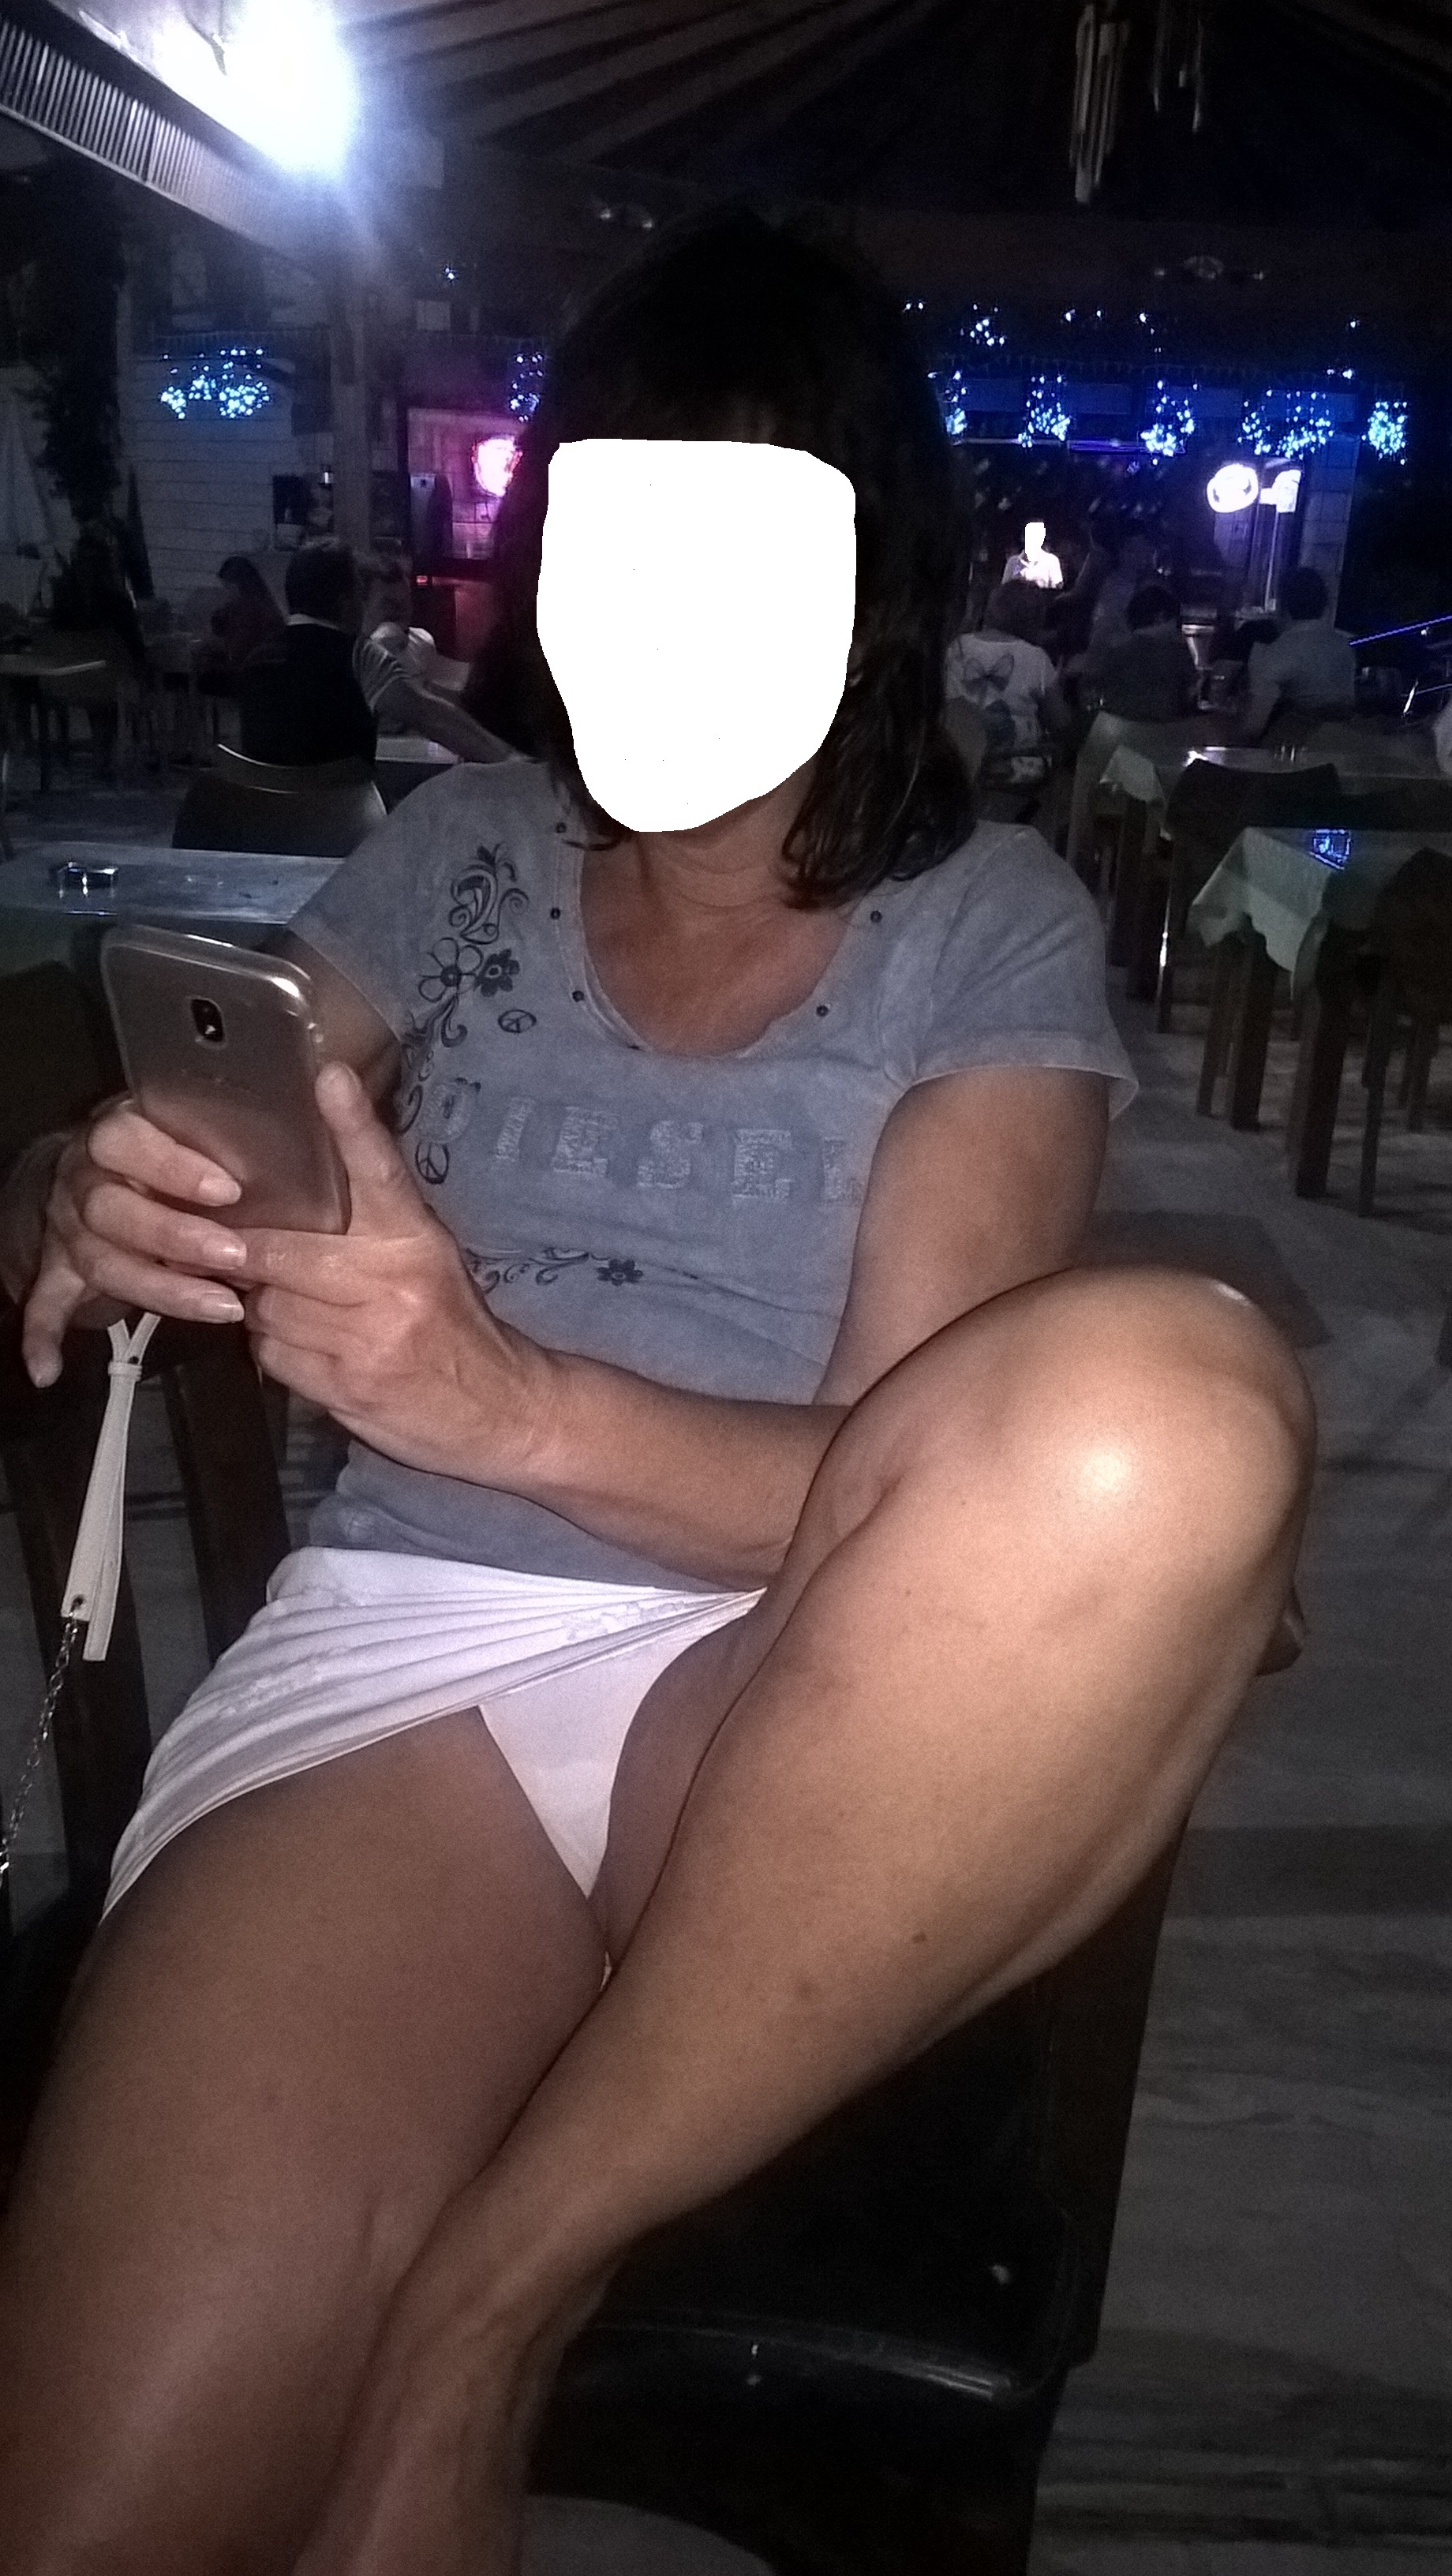 My wife showing a sexy upskirt in the